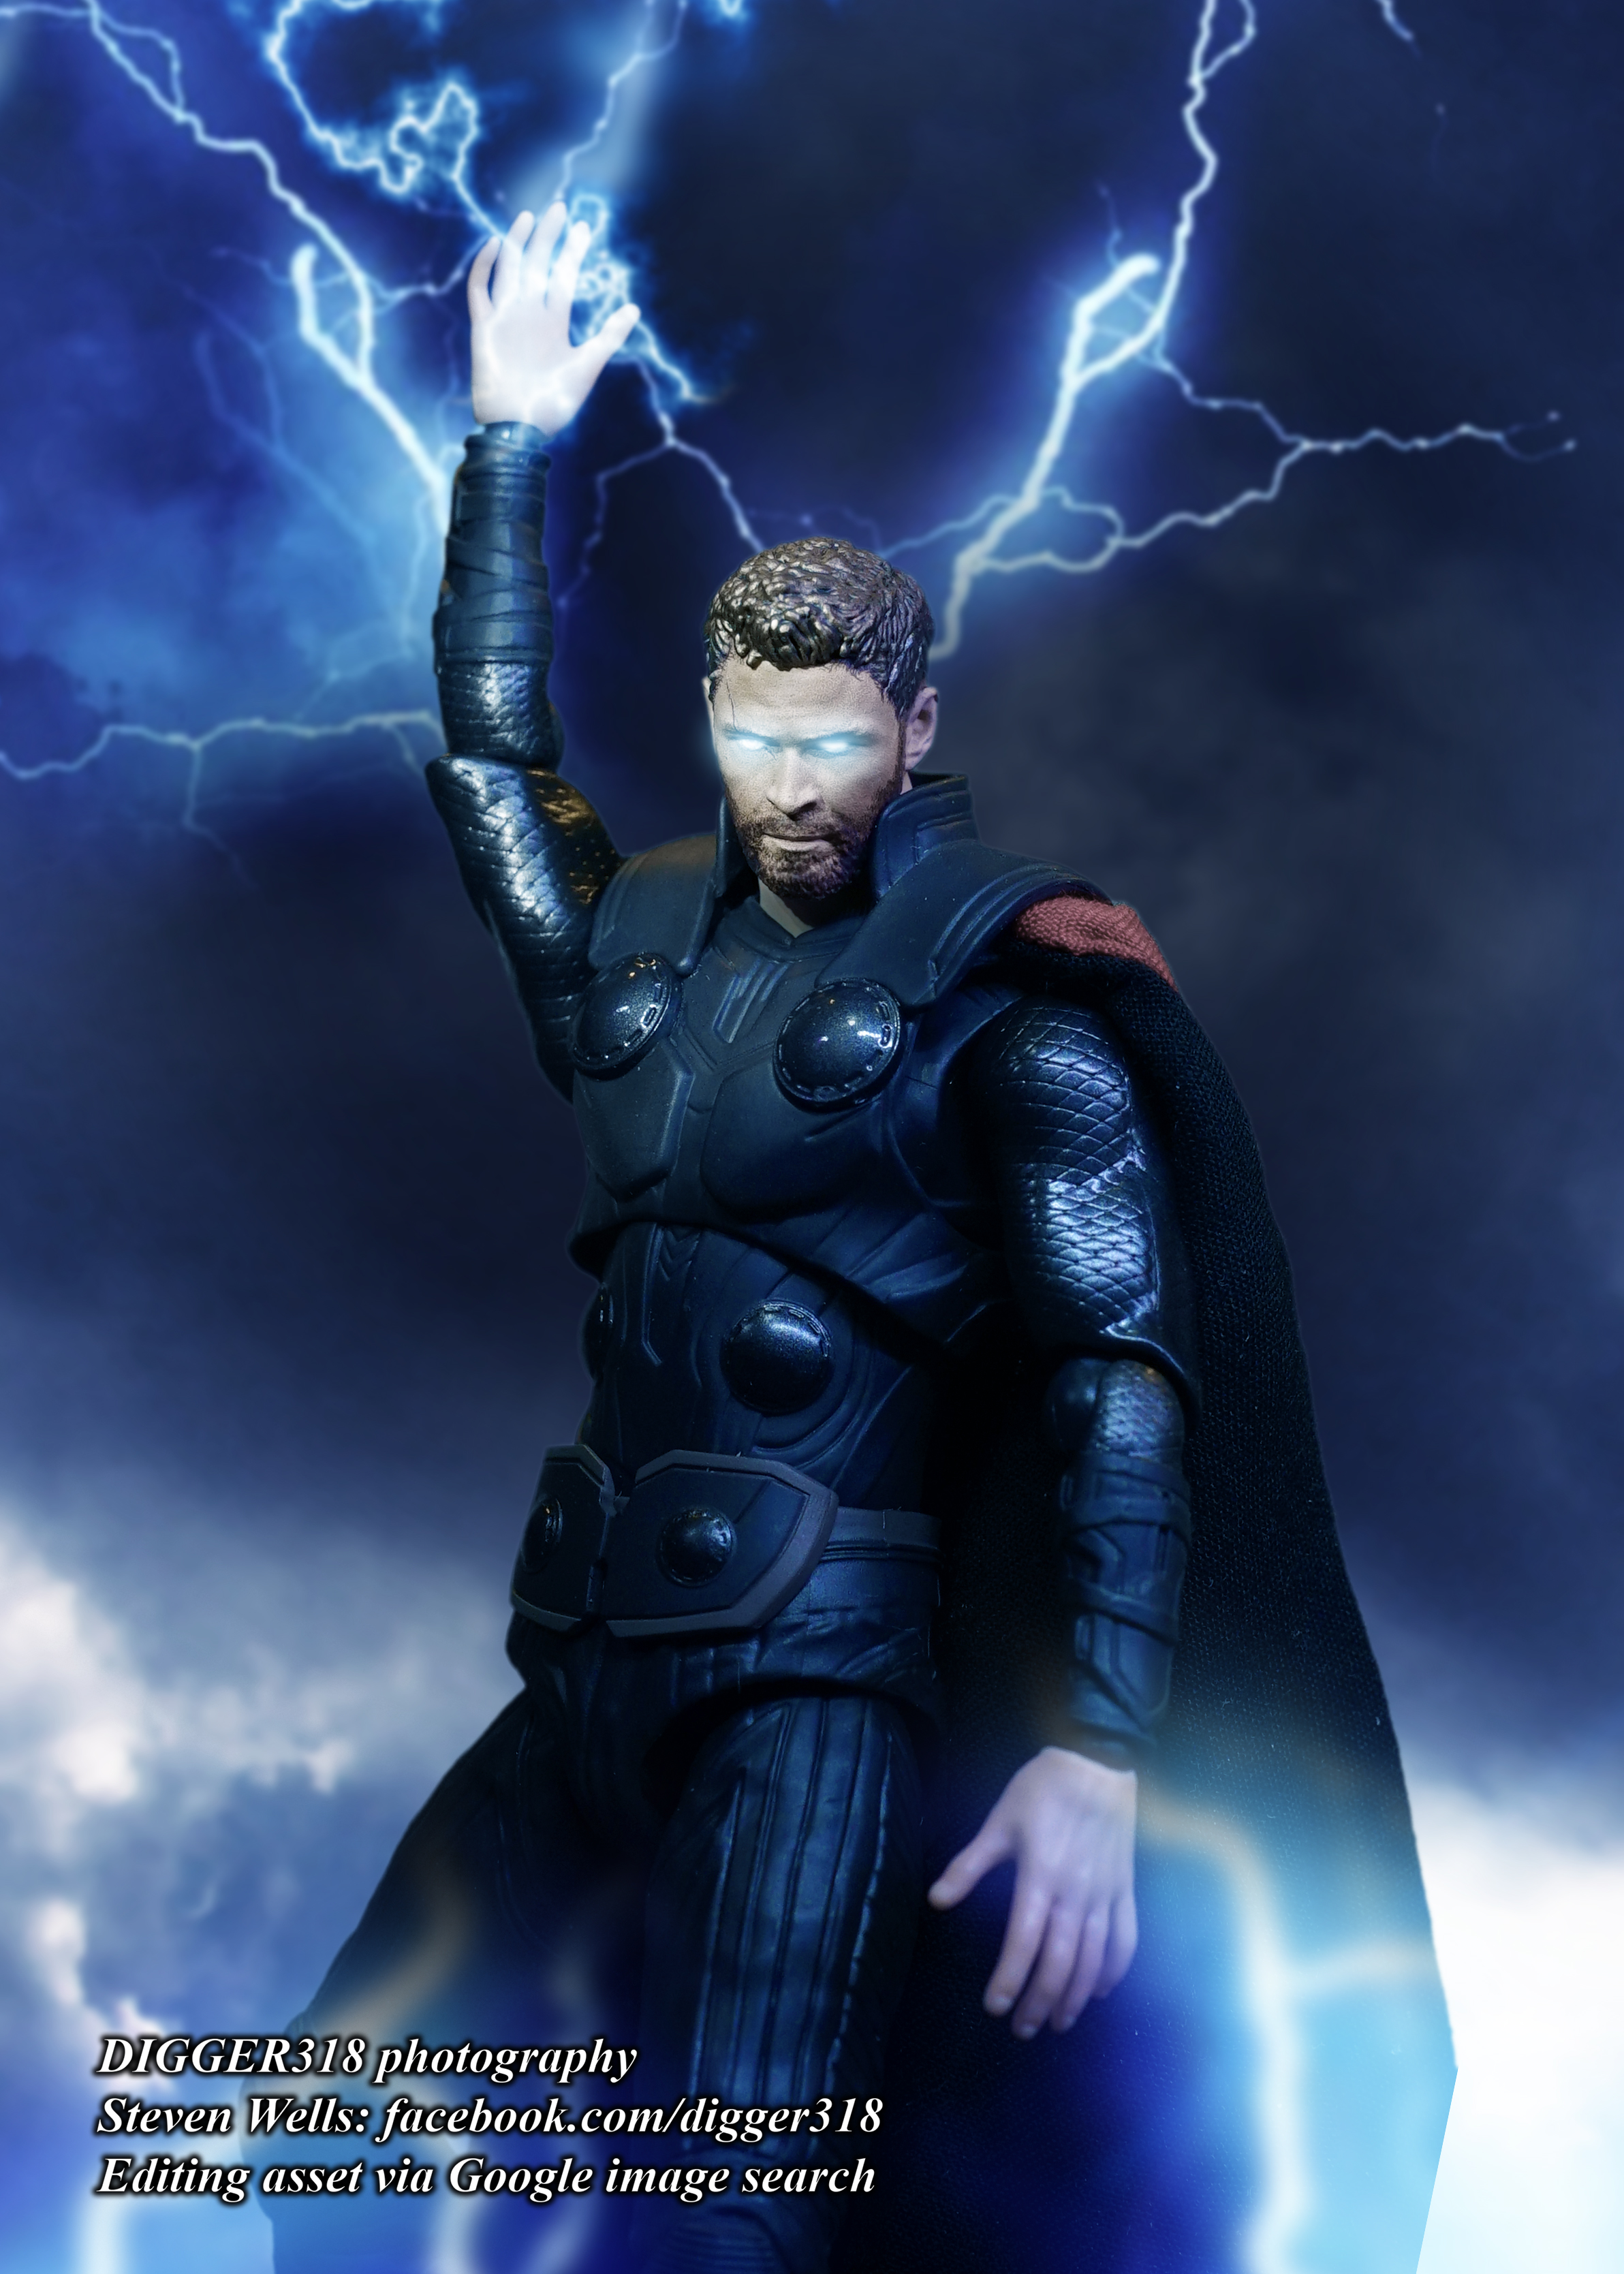 S. H. Figuarts Thor Avengers Infinity War Review by Digger318 on DeviantArt